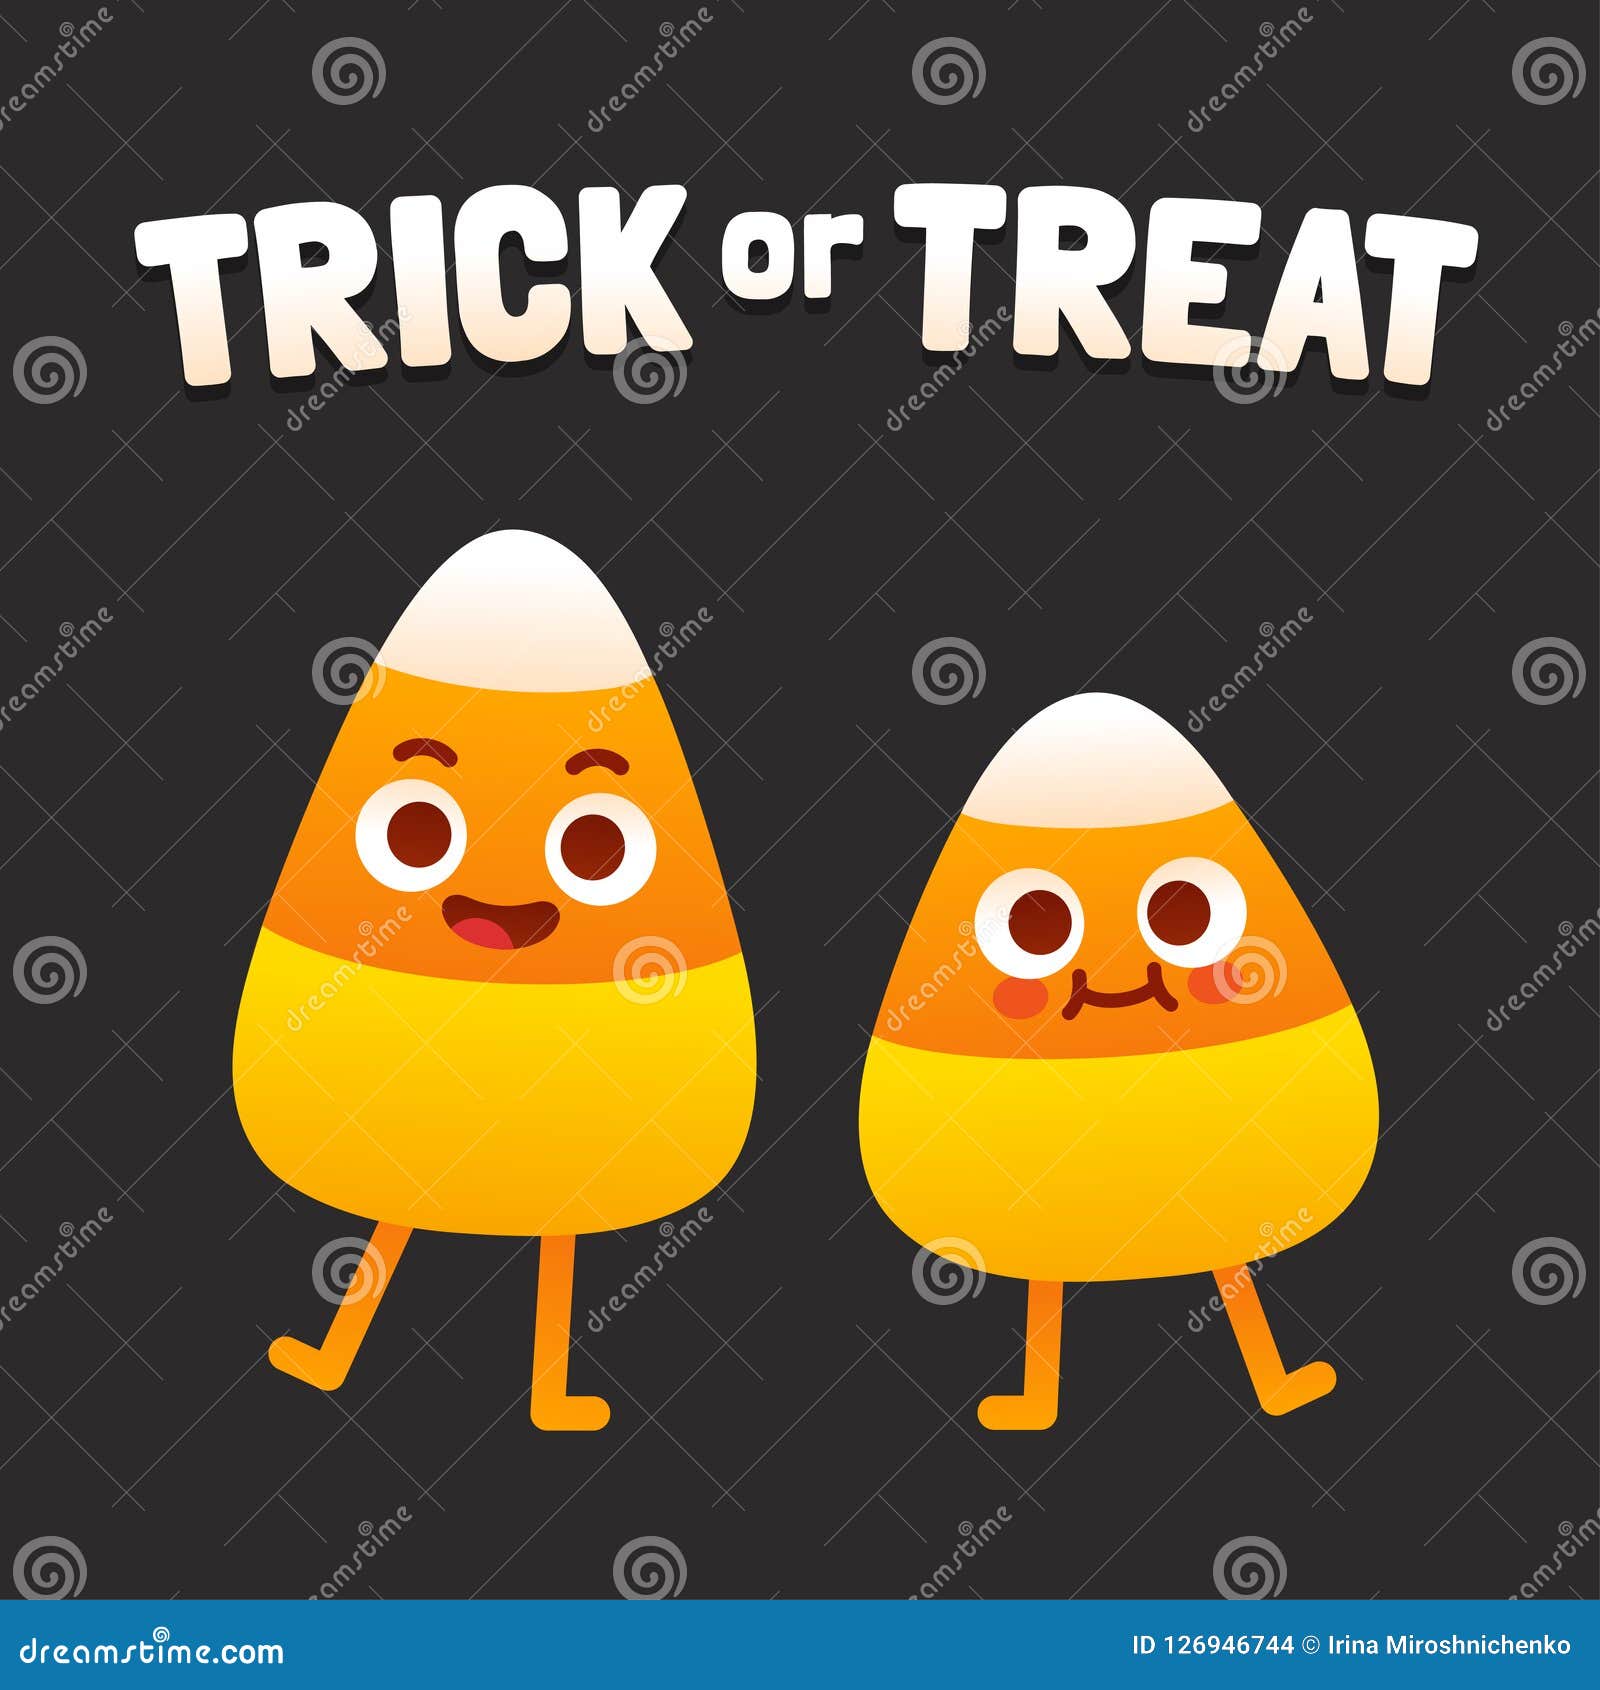 trick or treat candy corn